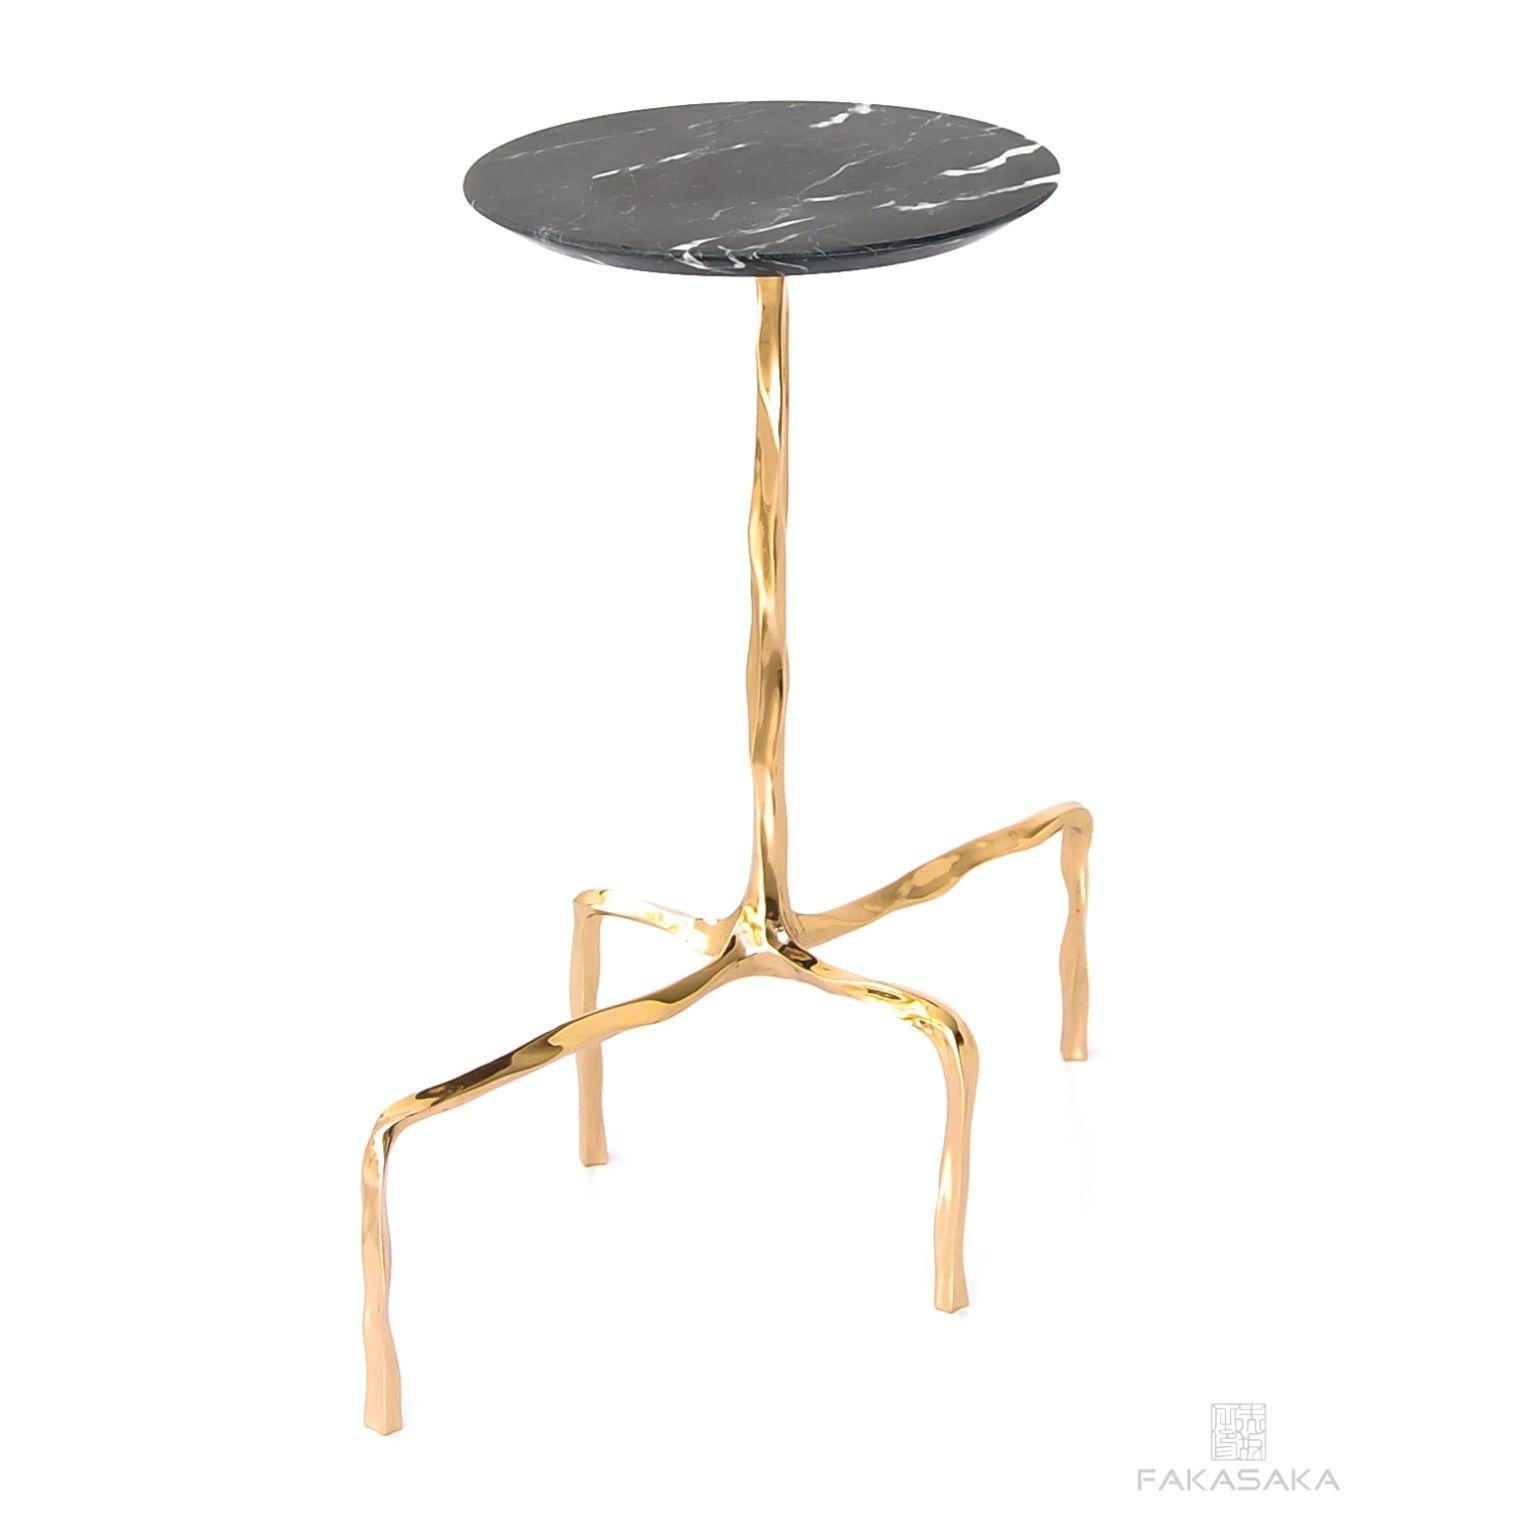 Contemporary Presley Drink Table with Nero Marquina Marble Top by Fakasaka Design For Sale